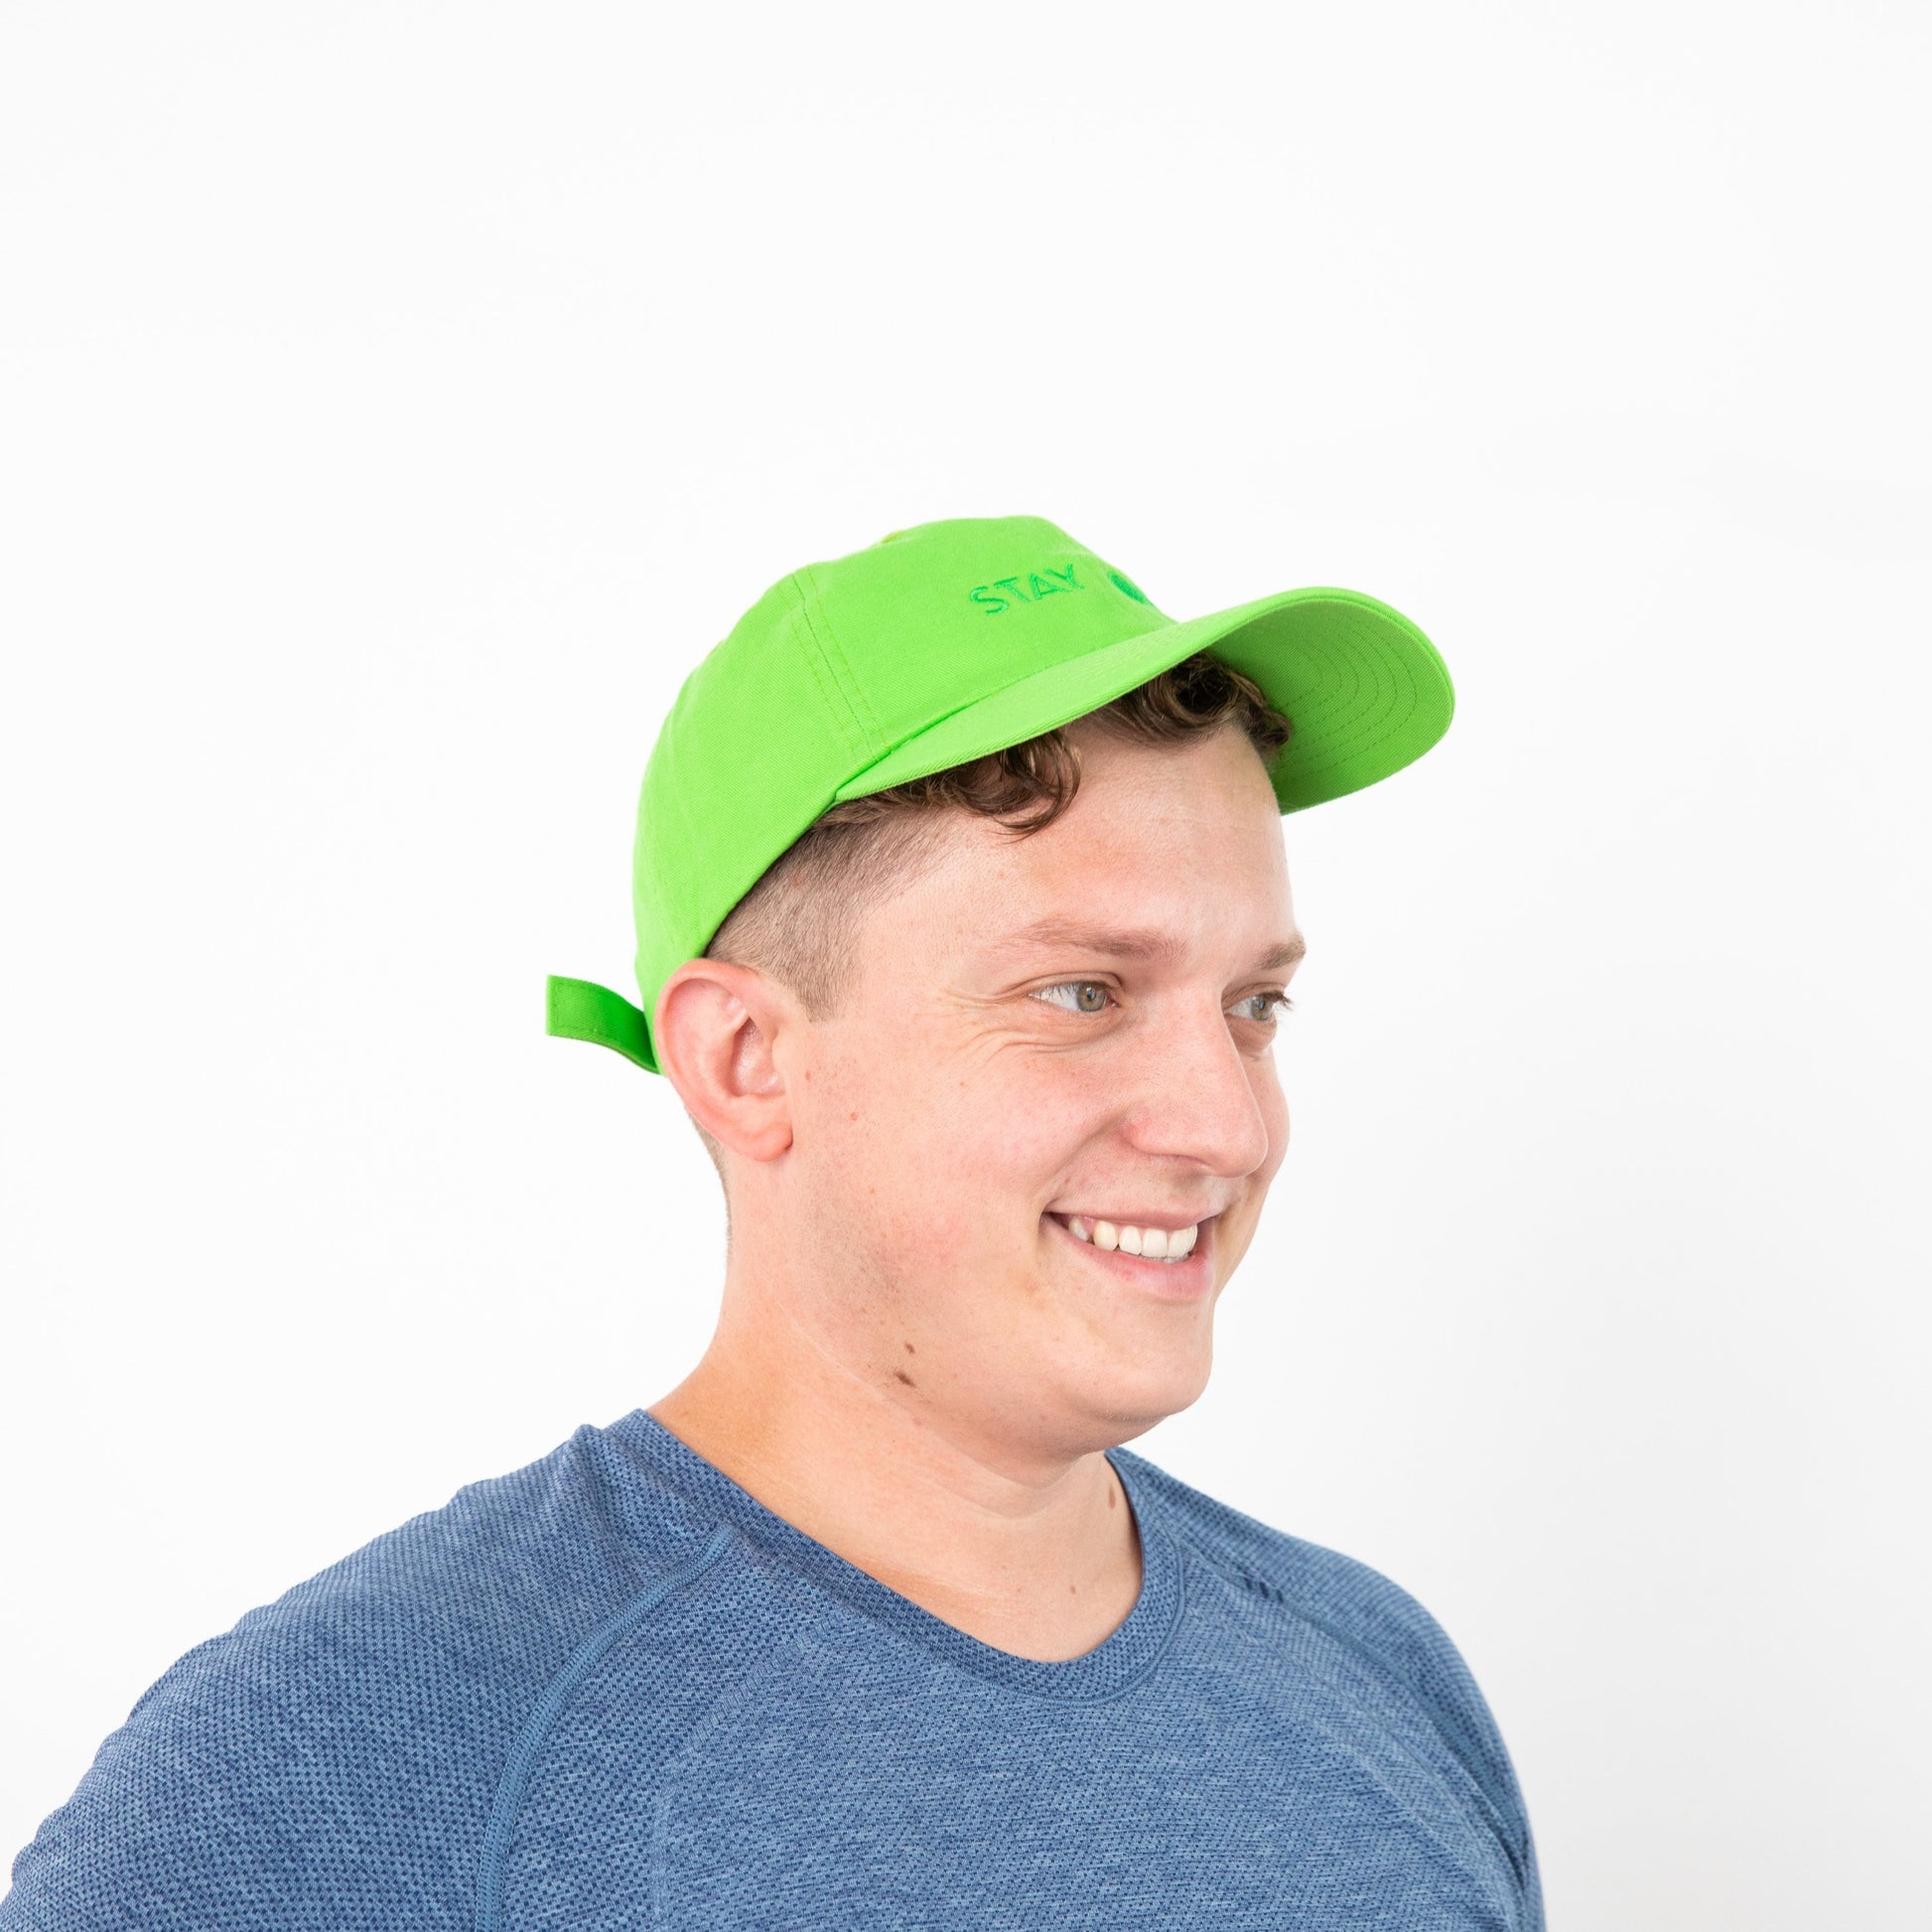 Side view of person wearing neon green baseball cap